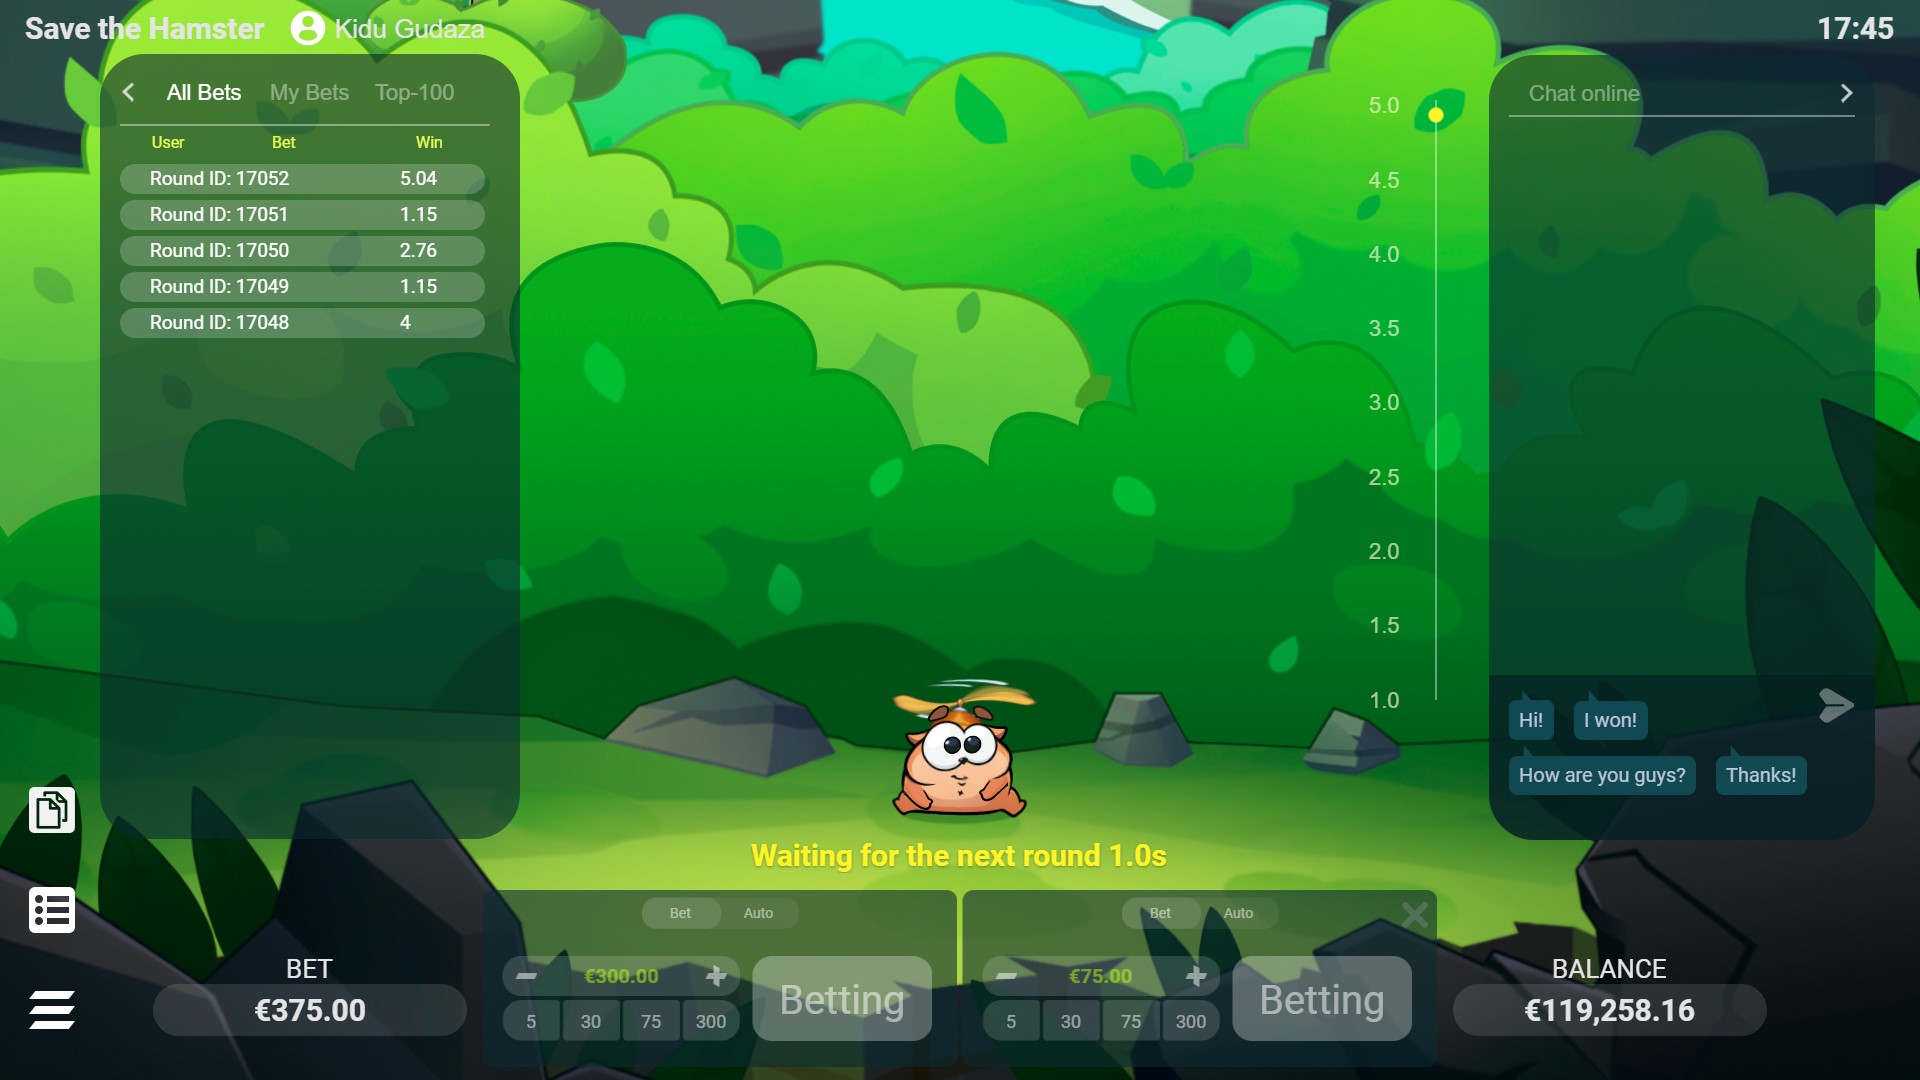 Save The Hamster game Interface